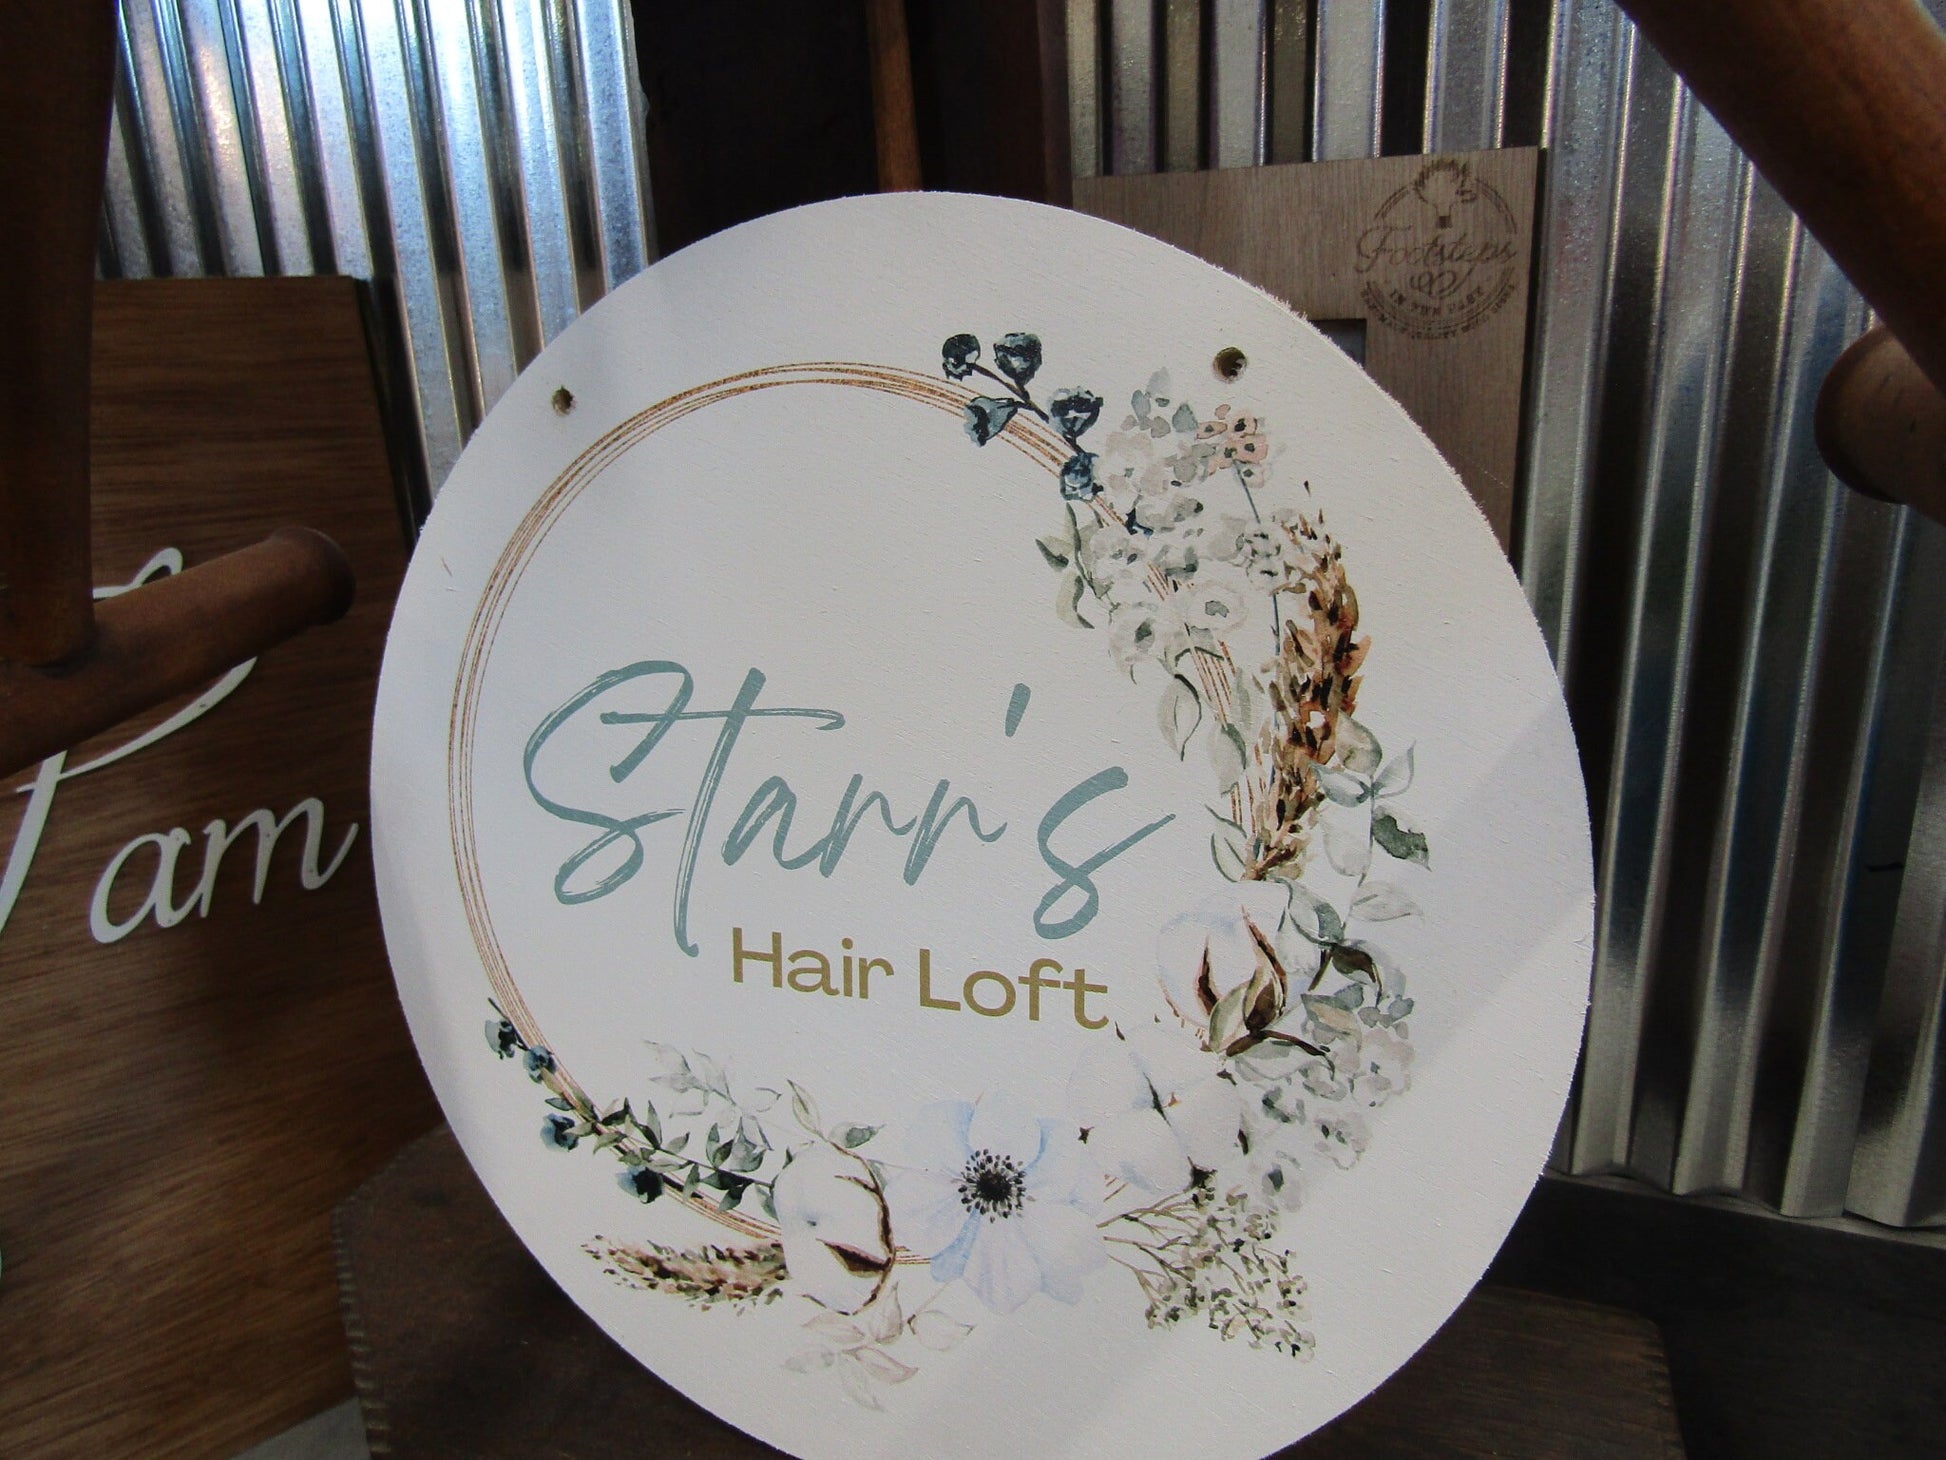 Custom Hairstylist Doorhanger Lightweight Loft Booth Sign Floral Border Printed In Color Your Logo Beauticain Salon Sign Commerical Signage